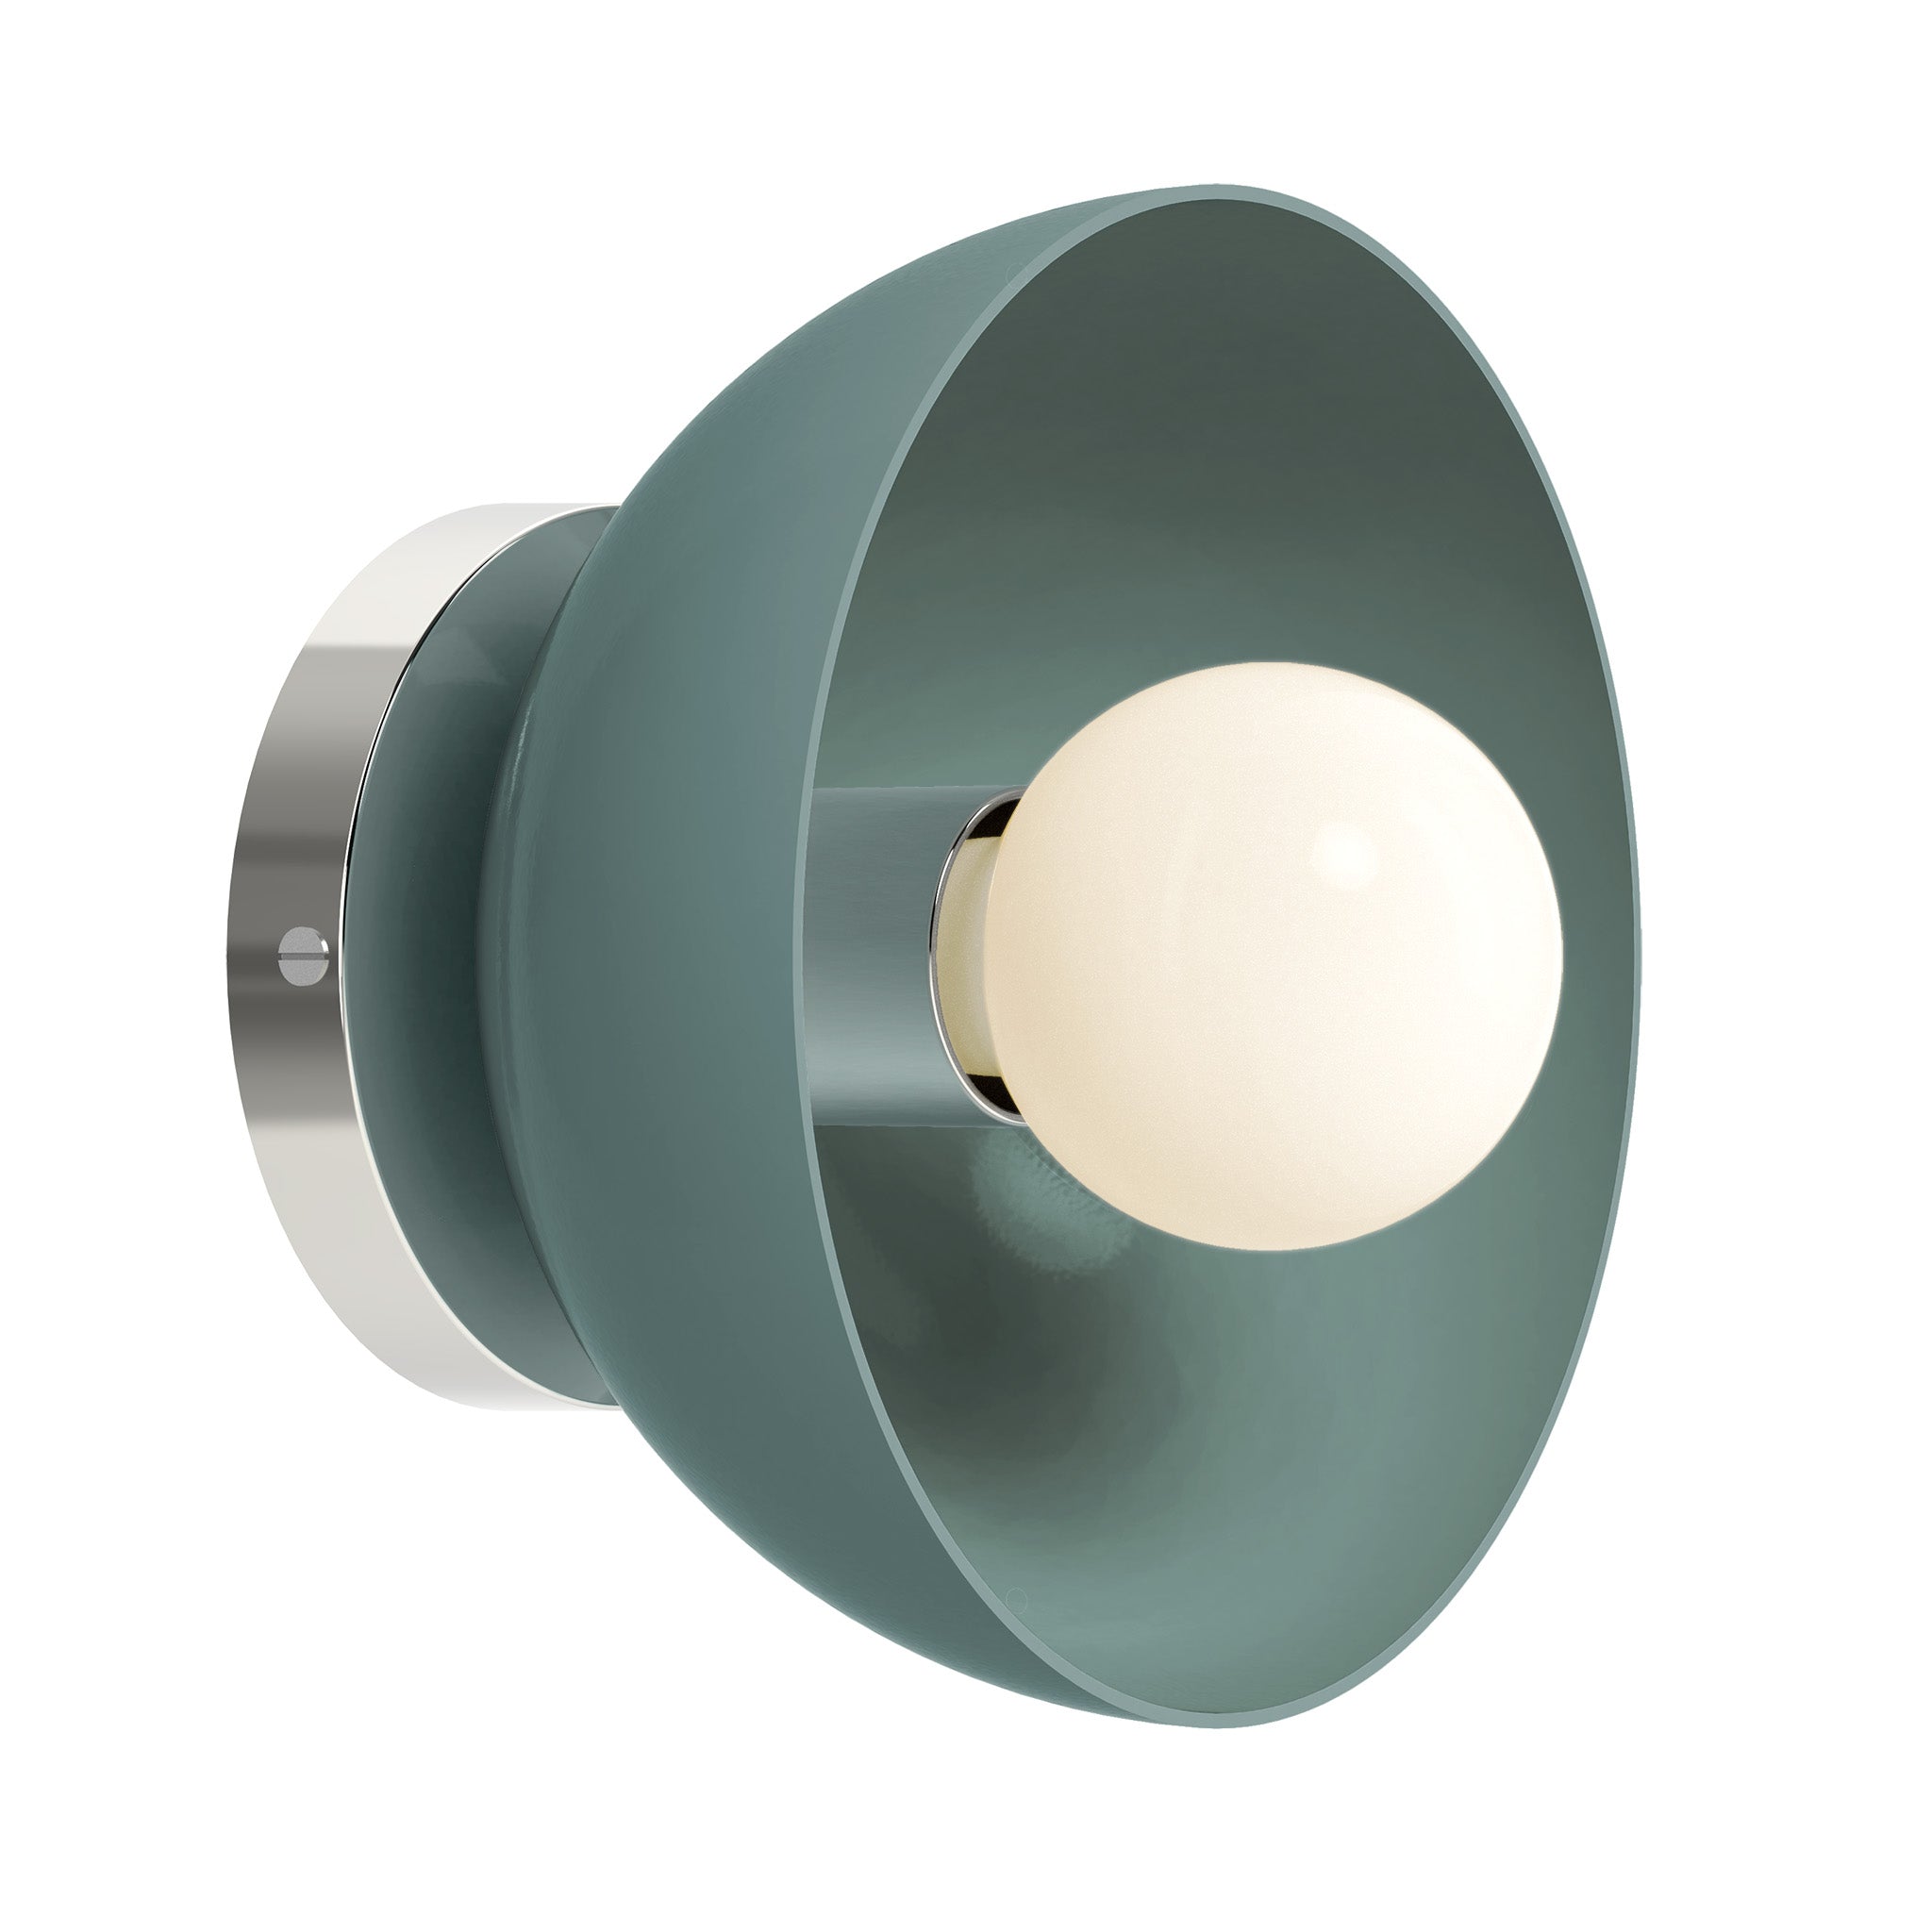 Nickel and python green color Hemi sconce 8" Dutton Brown lighting